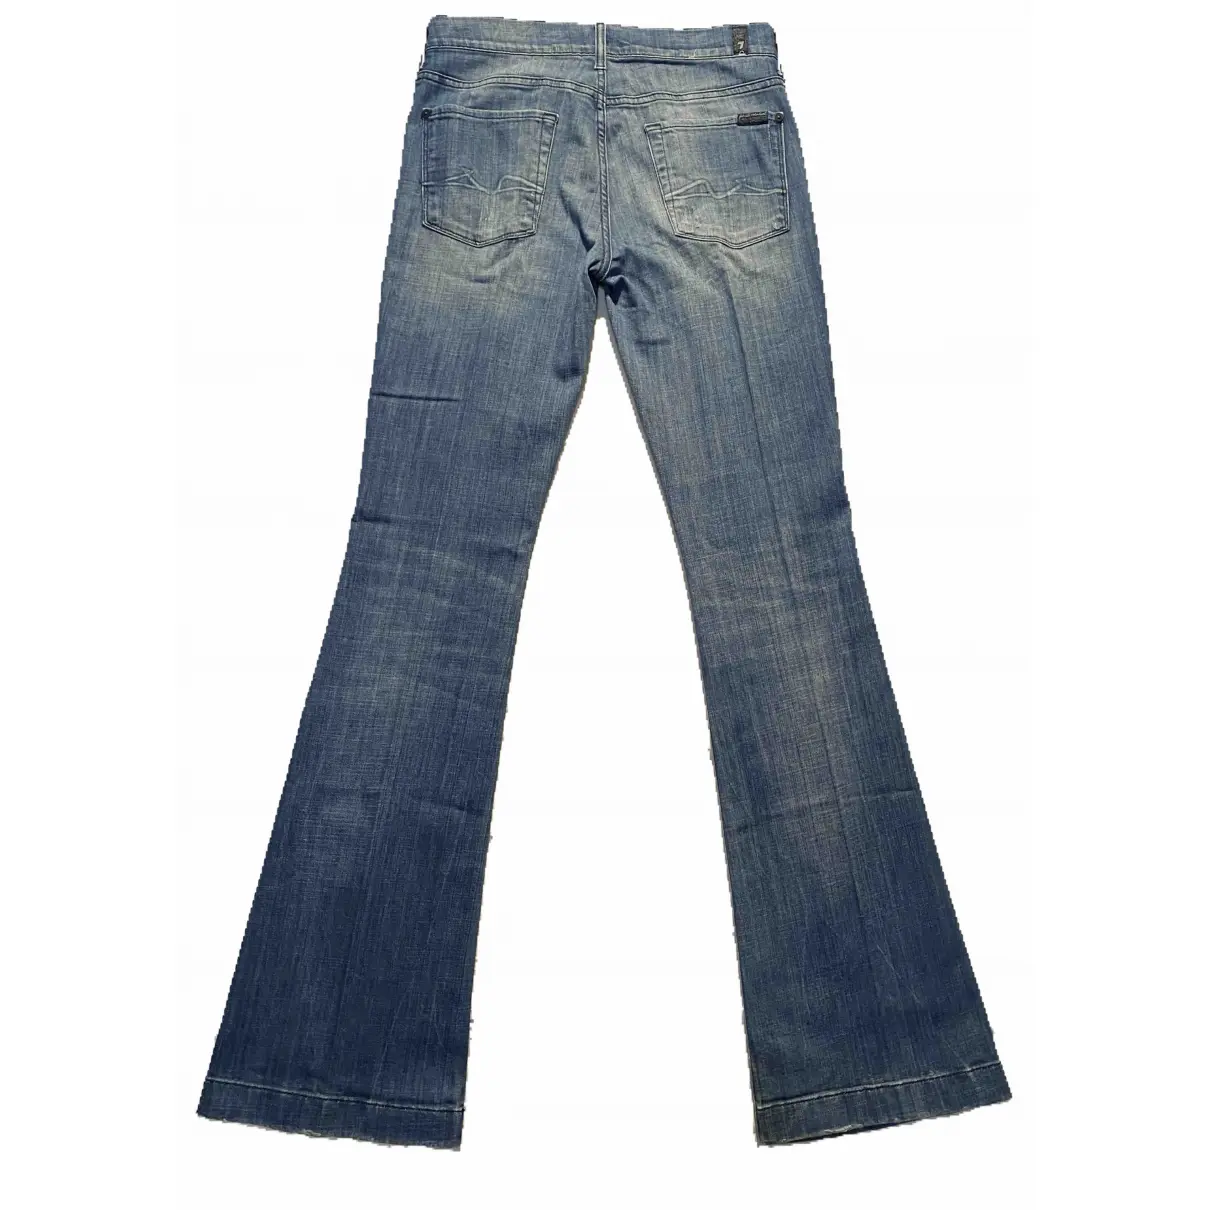 Buy 7 For All Mankind Blue Cotton - elasthane Jeans online